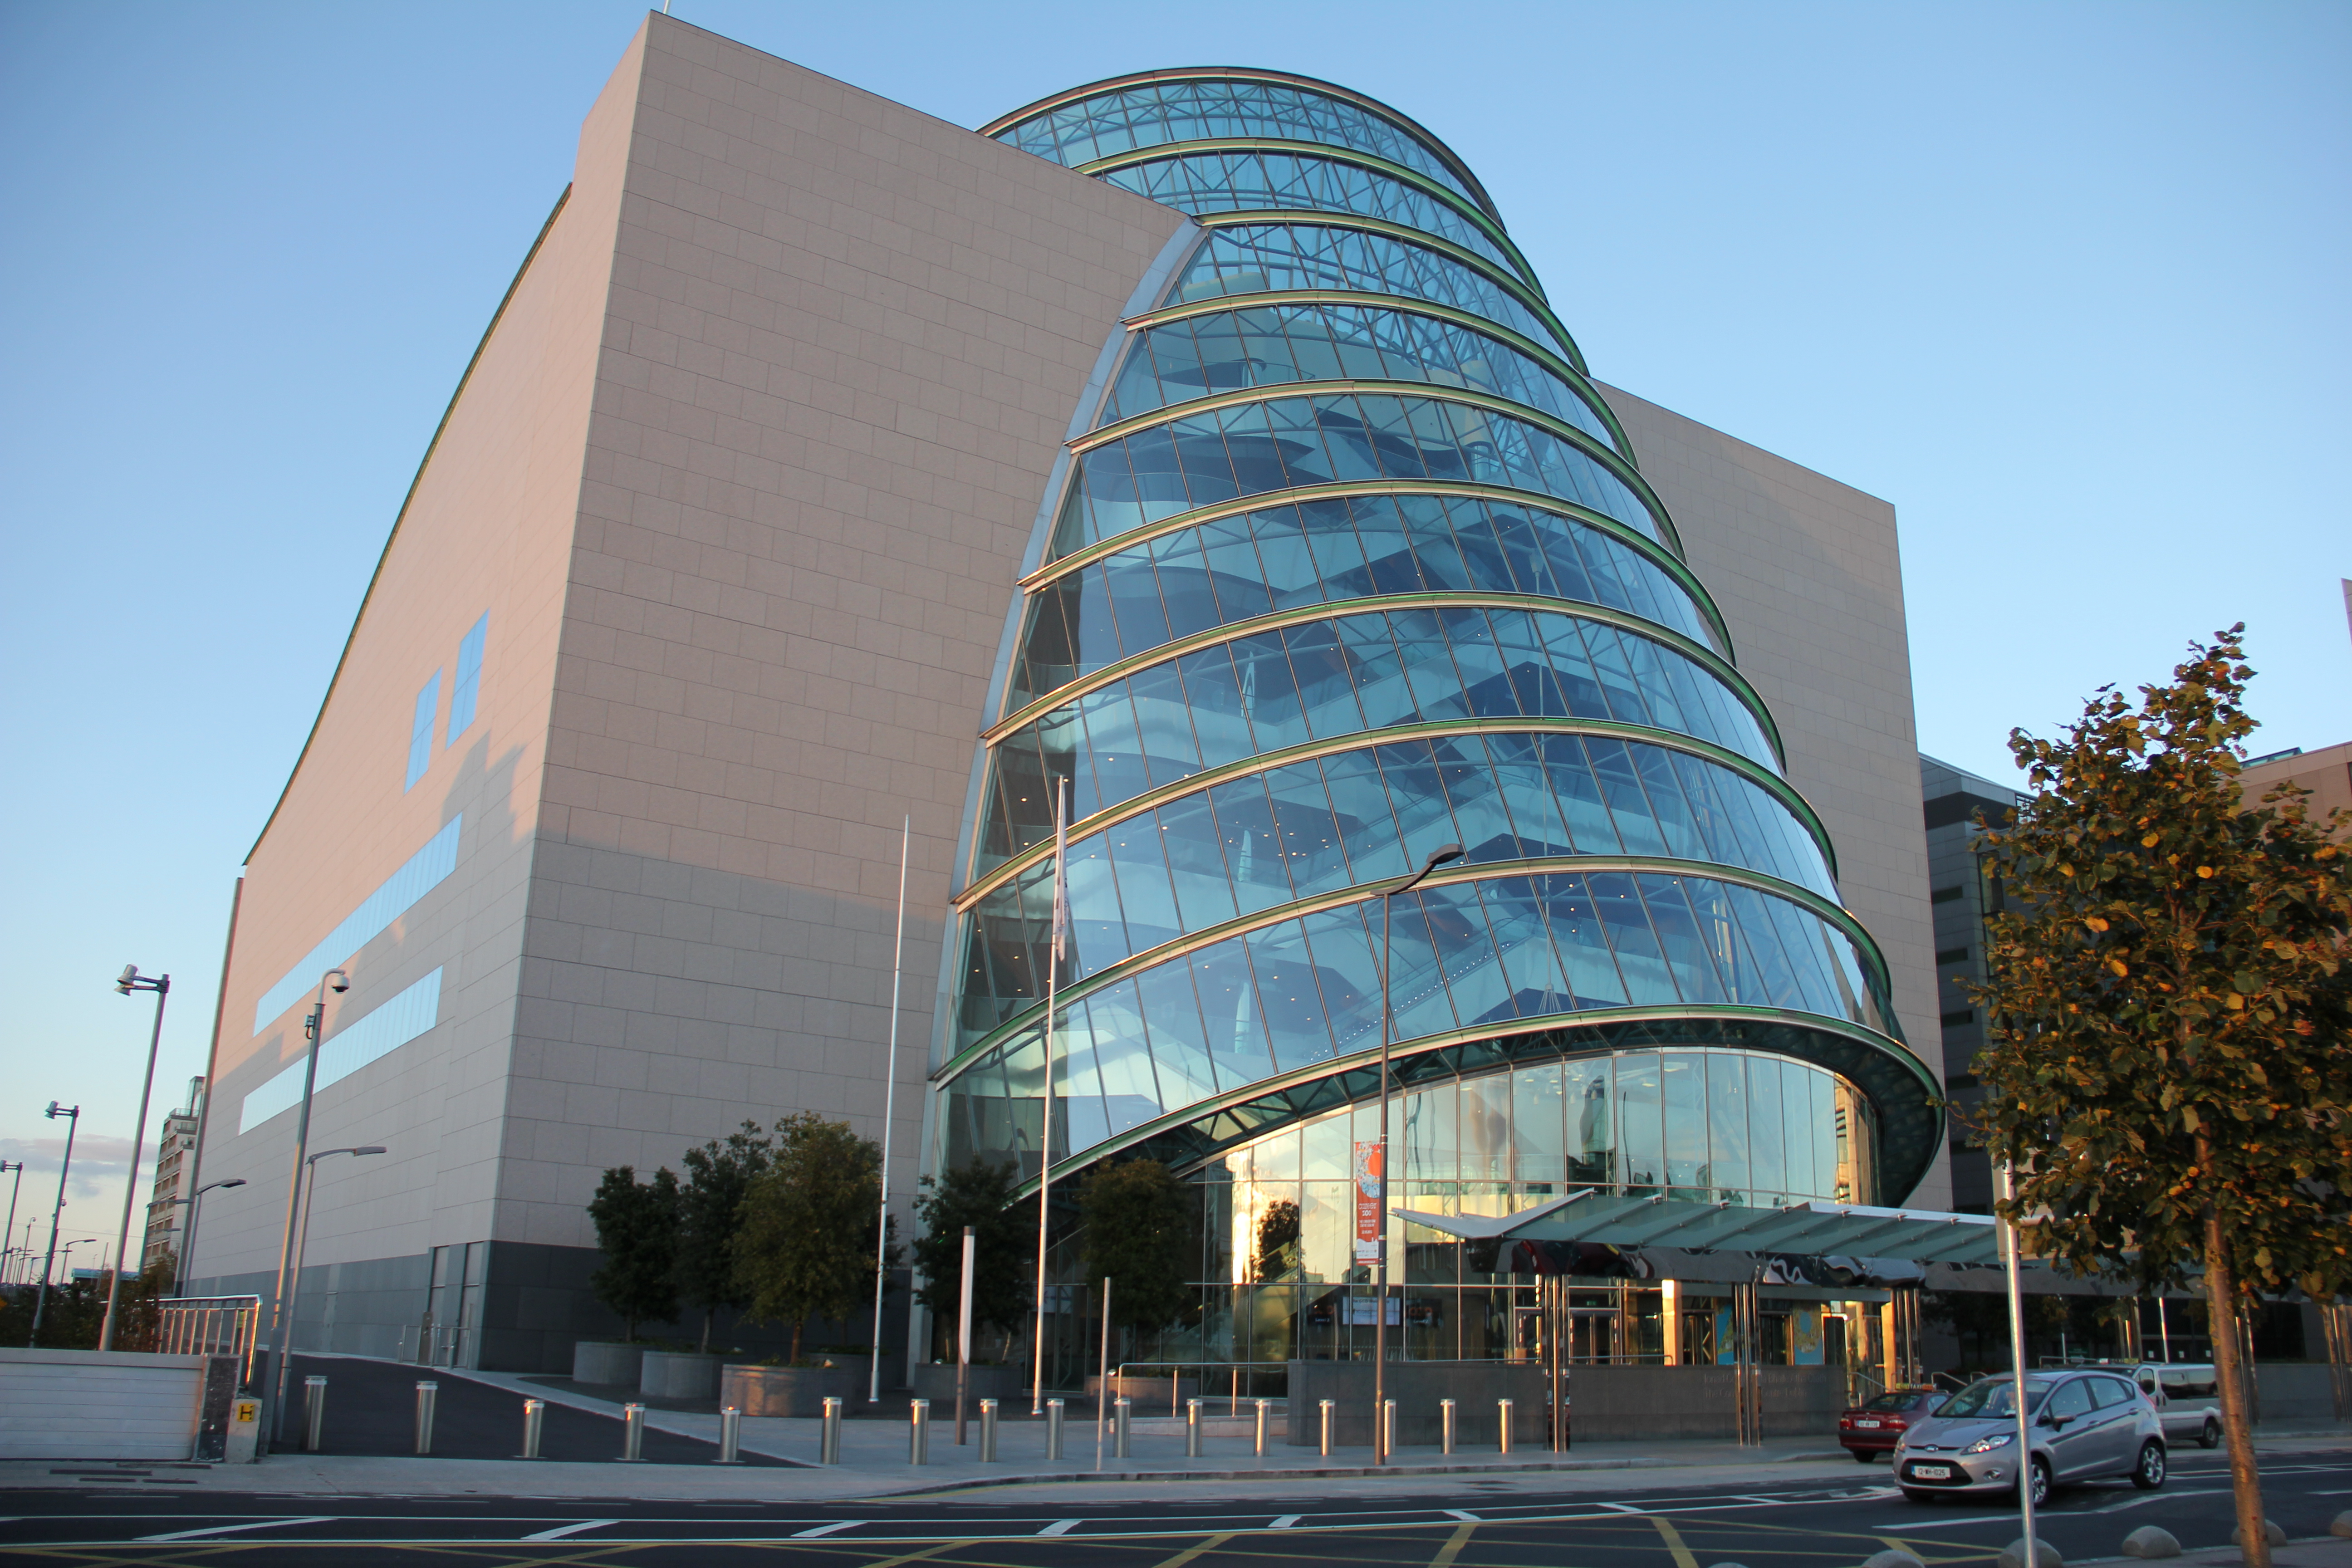 Convention Centre in the Dublin Docklands, Ireland by J.-H. Janßen (Wikipedia)